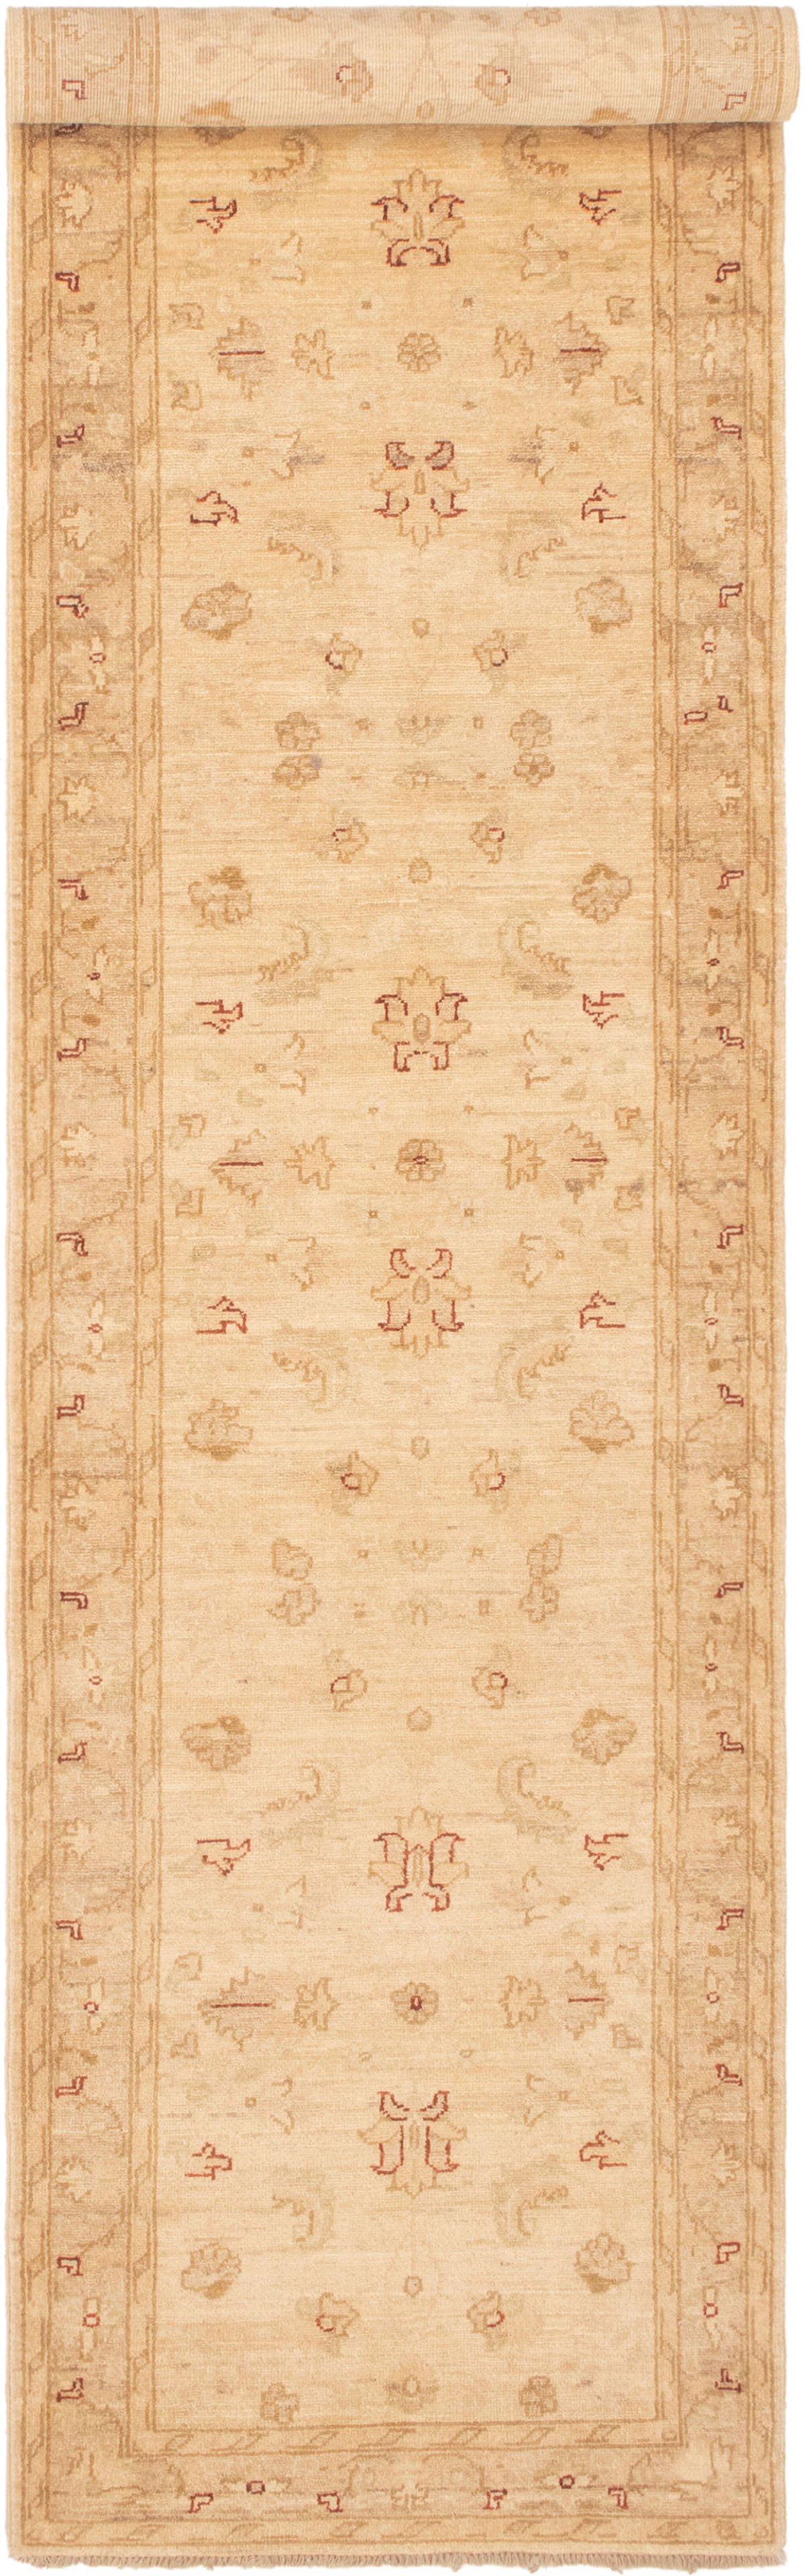 Hand-knotted Peshawar Finest Ivory Wool Rug 2'9" x 13'1" Size: 2'9" x 13'1"  